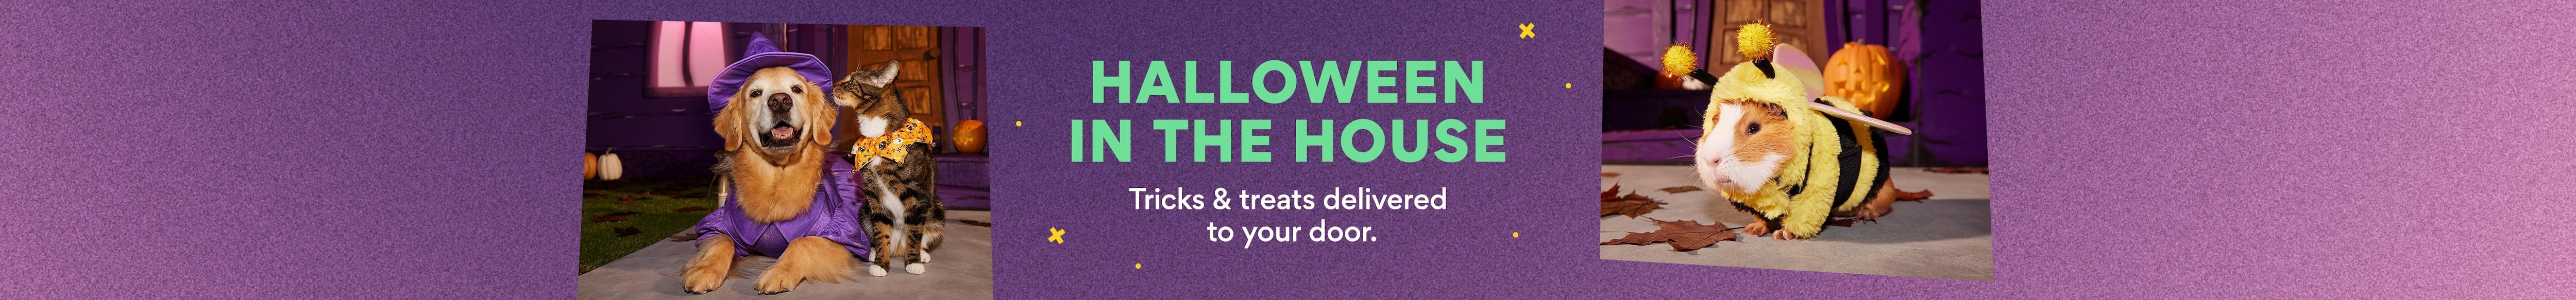 halloween in the house. tricks and treats delivered to your door